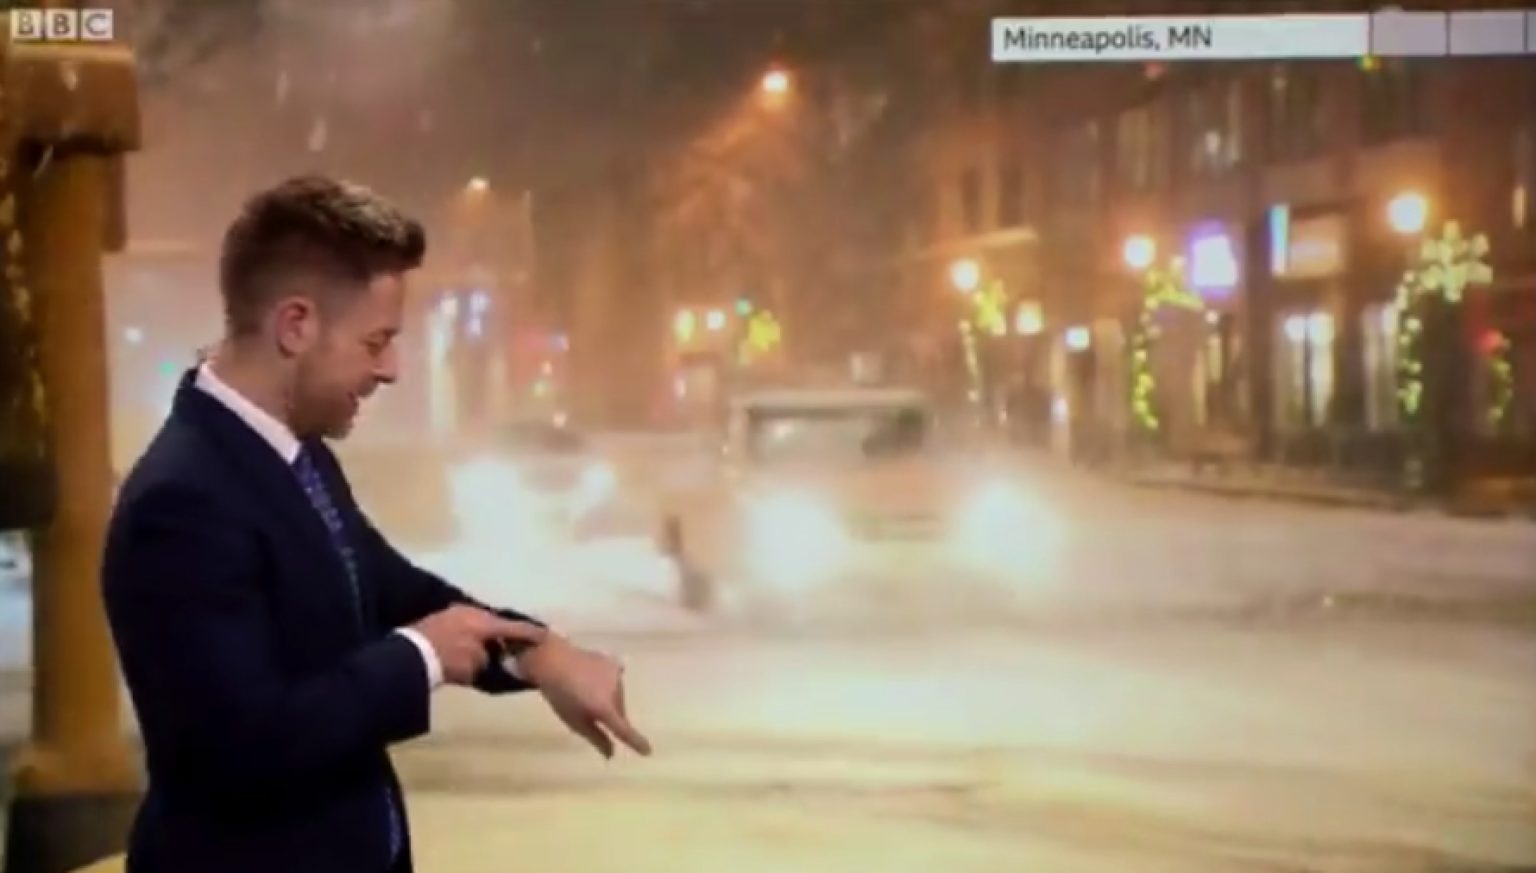 Siri corrects weatherman during a live broadcast